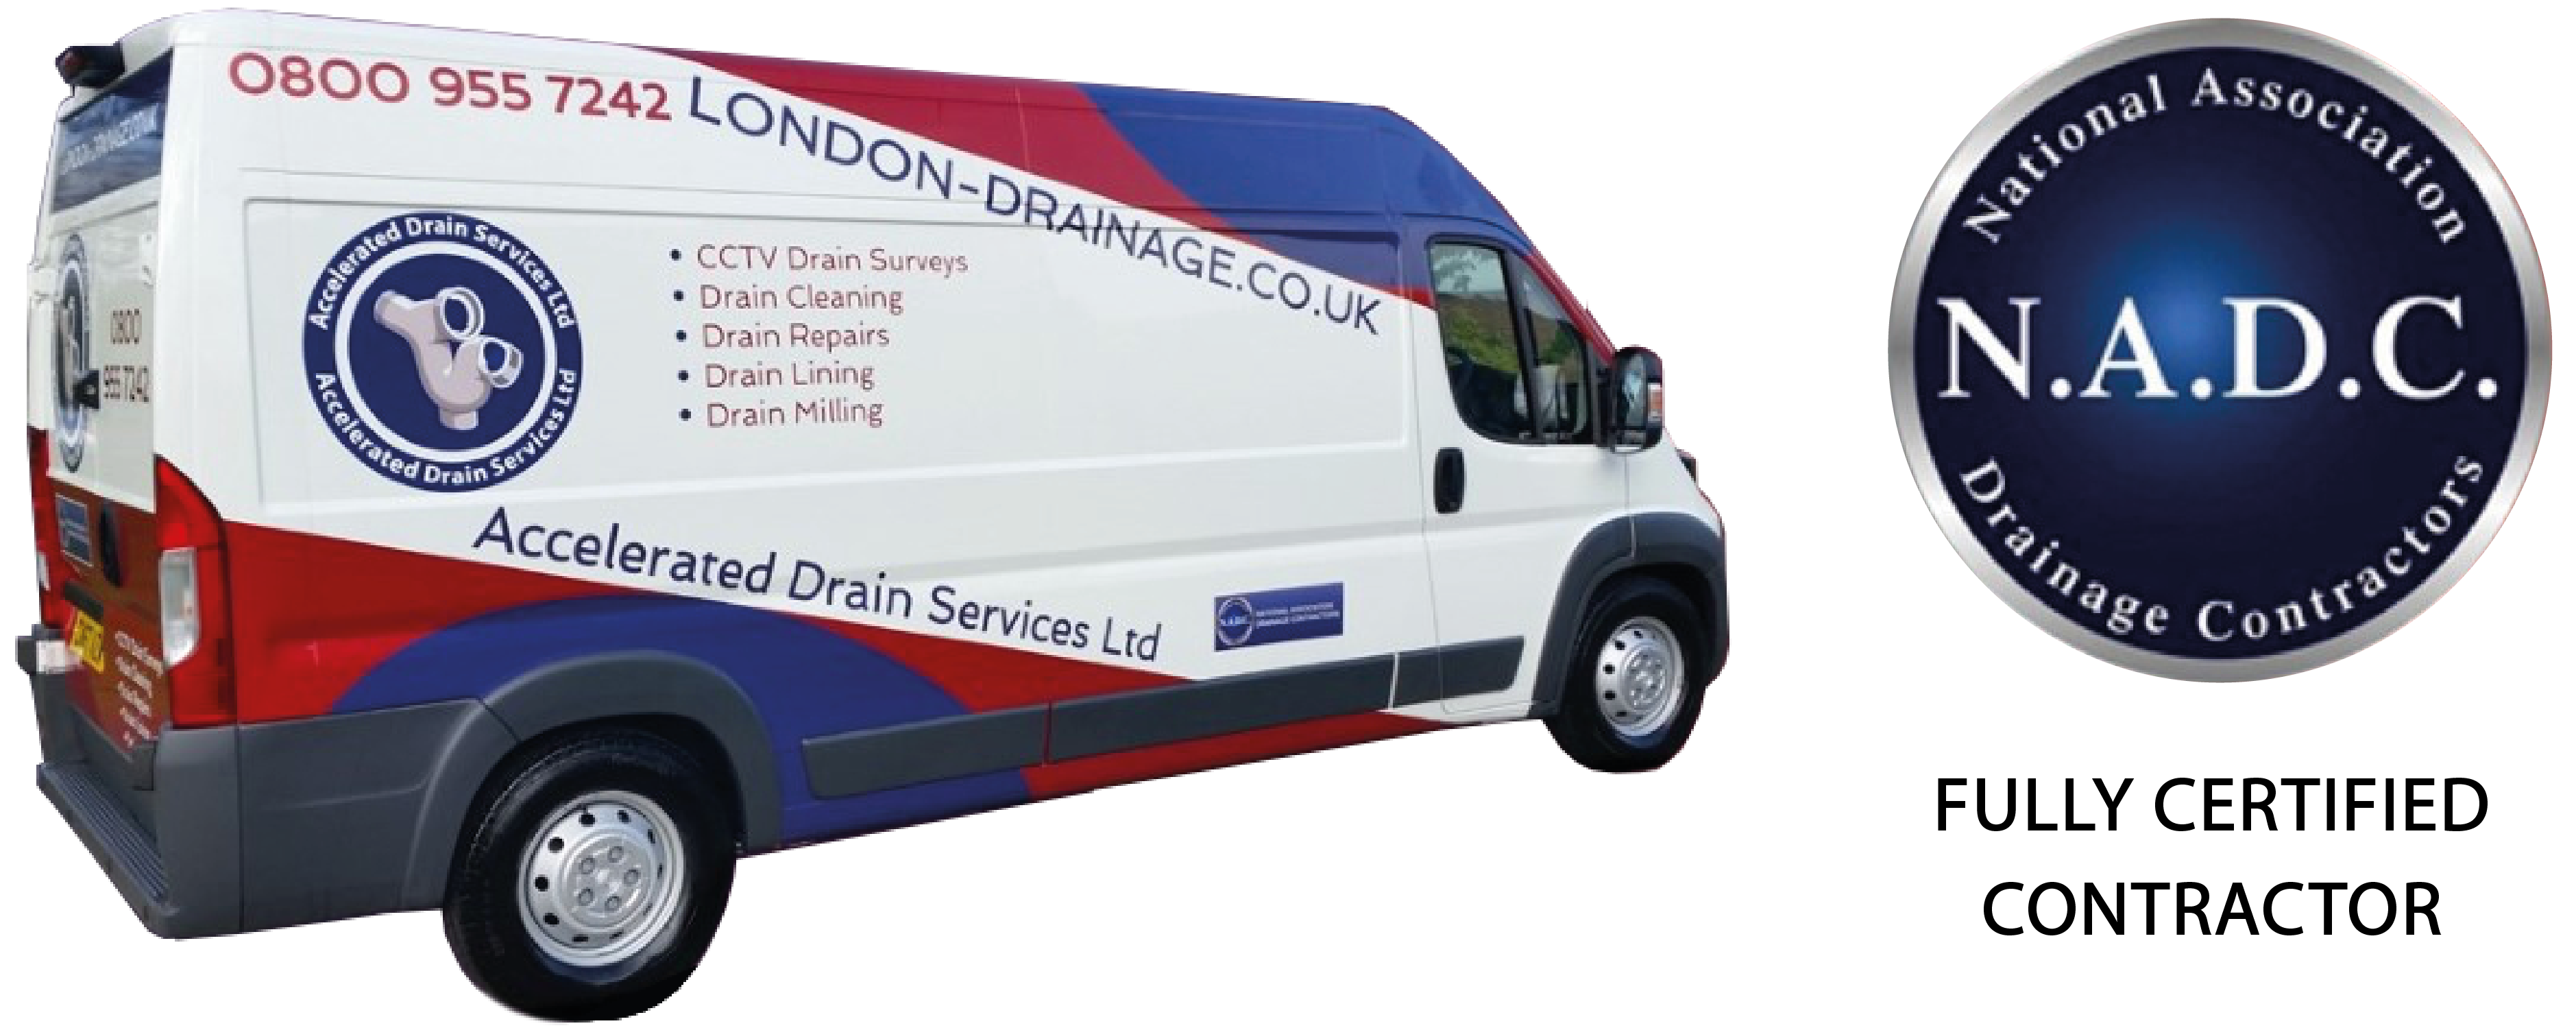 London Drainage Services - Fully Certified Contractors.